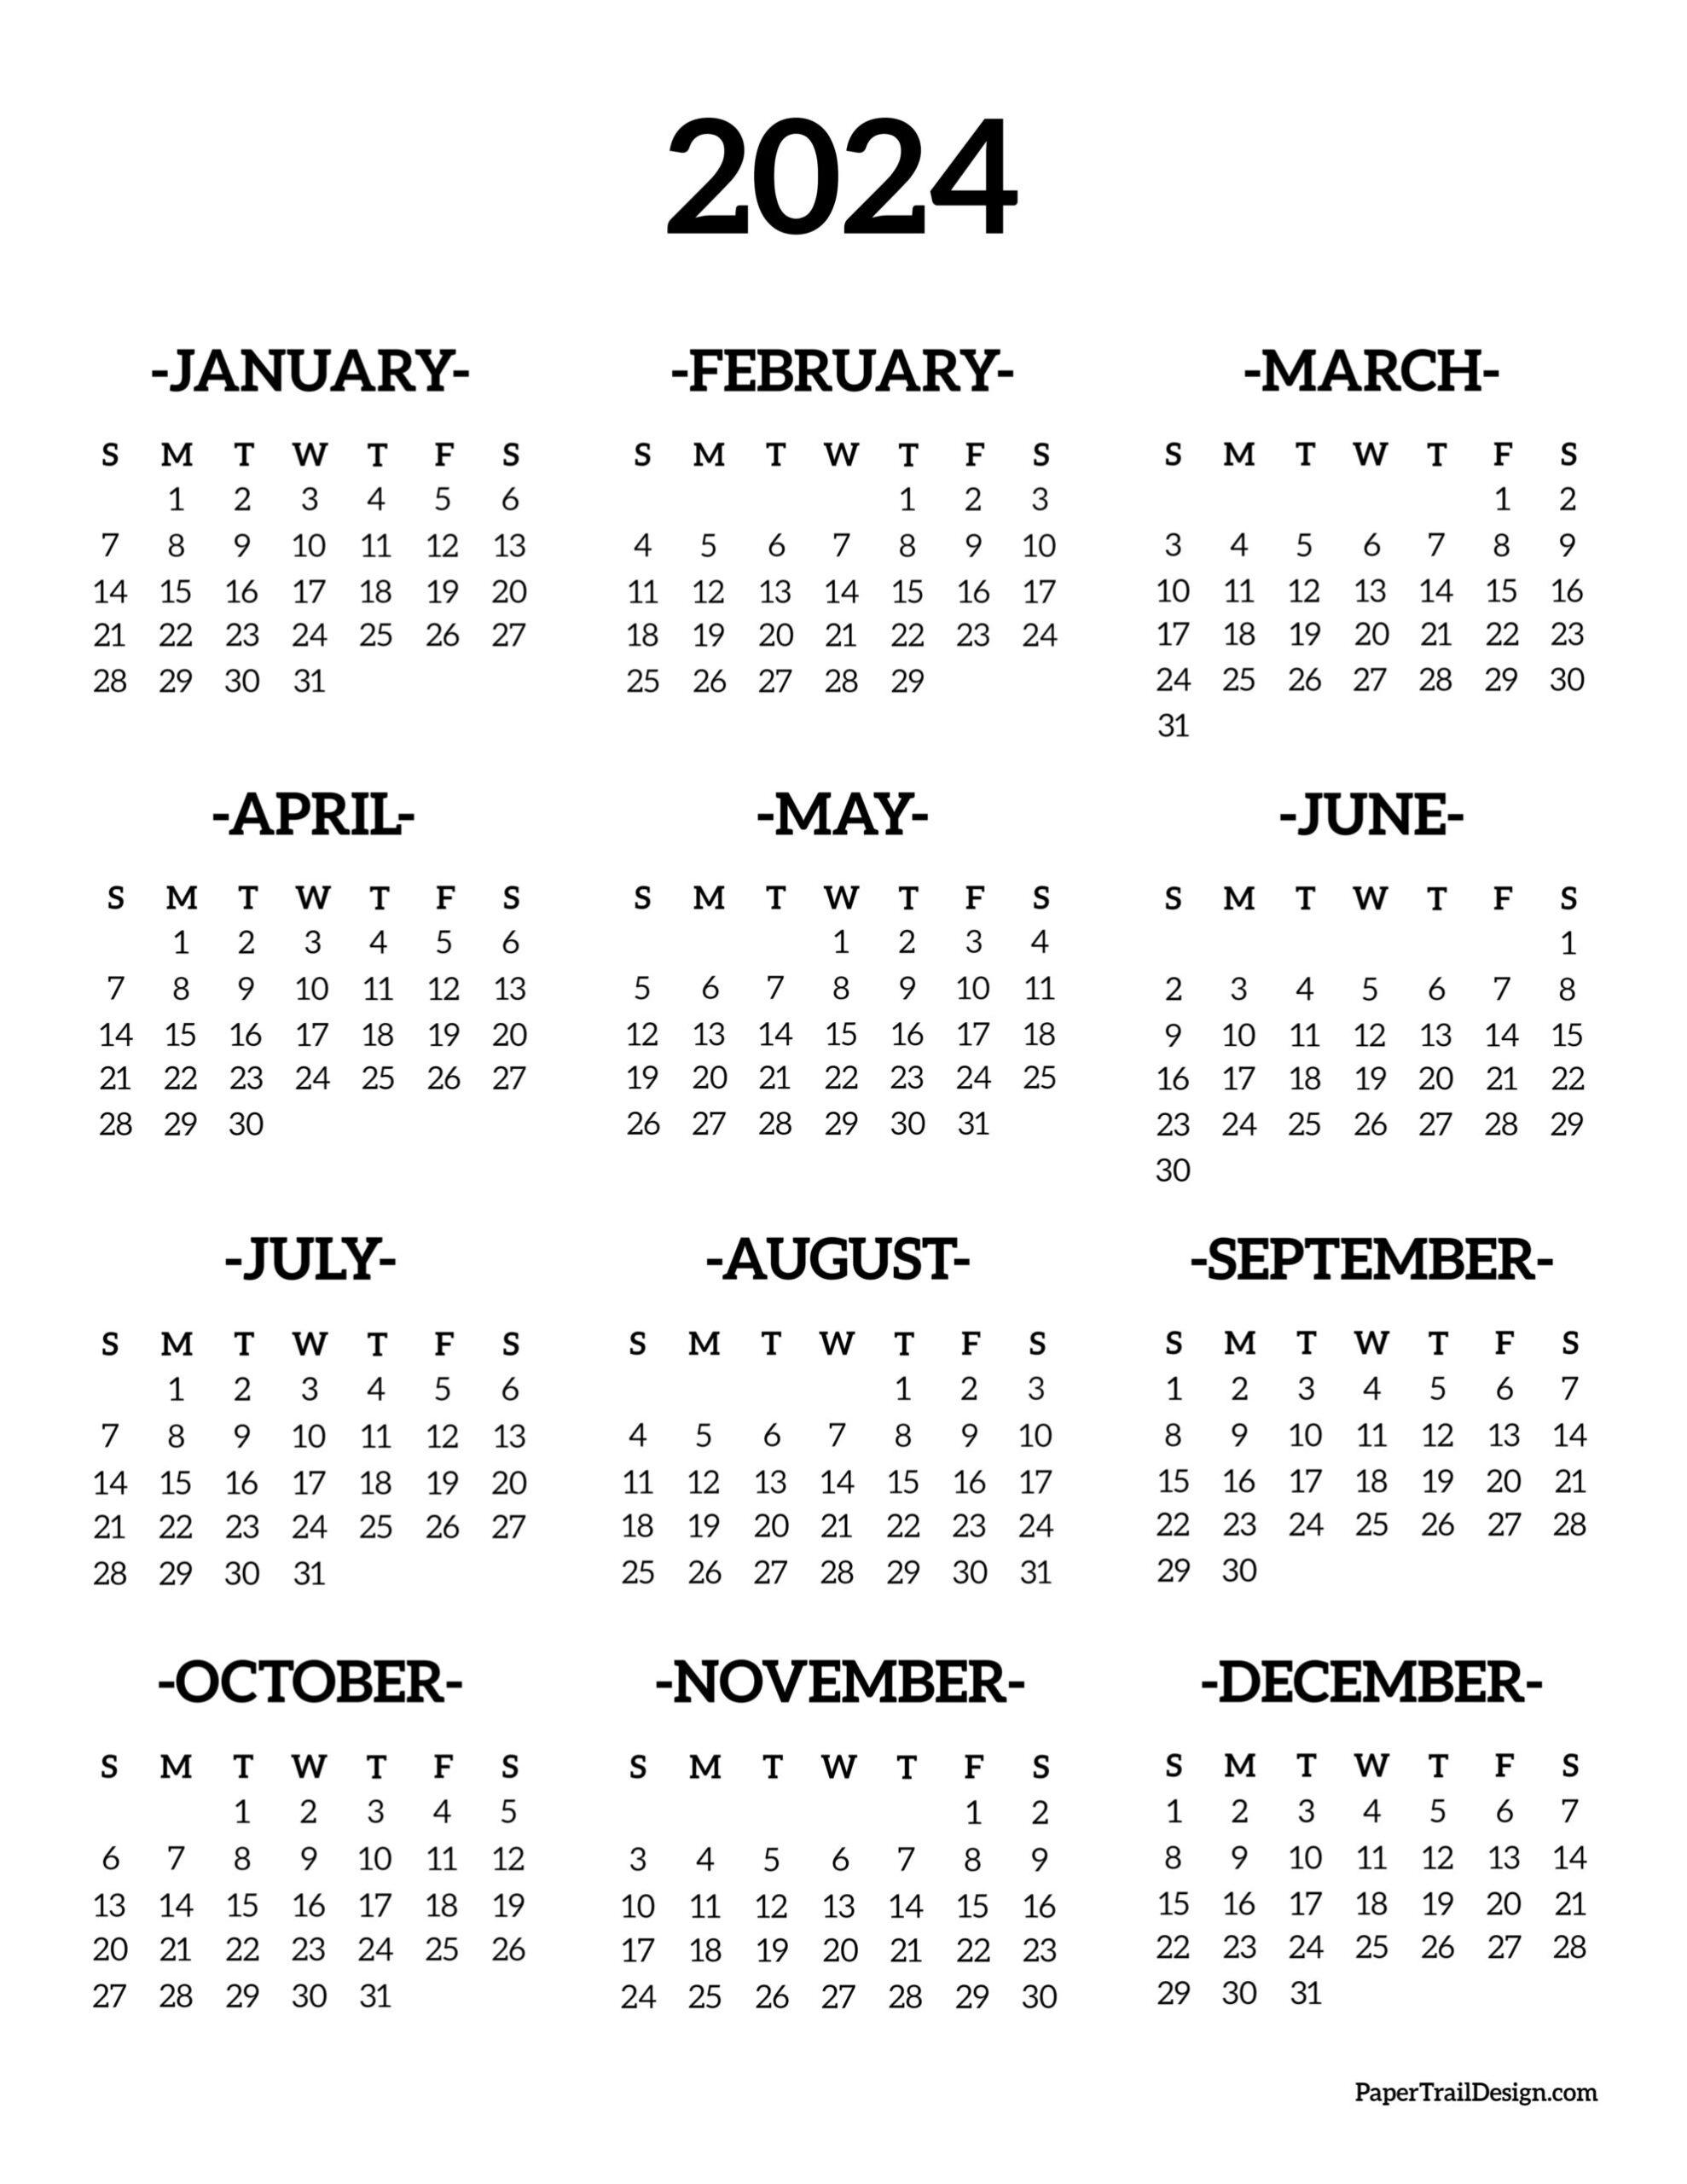 Calendar 2024 Printable One Page - Paper Trail Design | Yearly Printable Calendar 2024